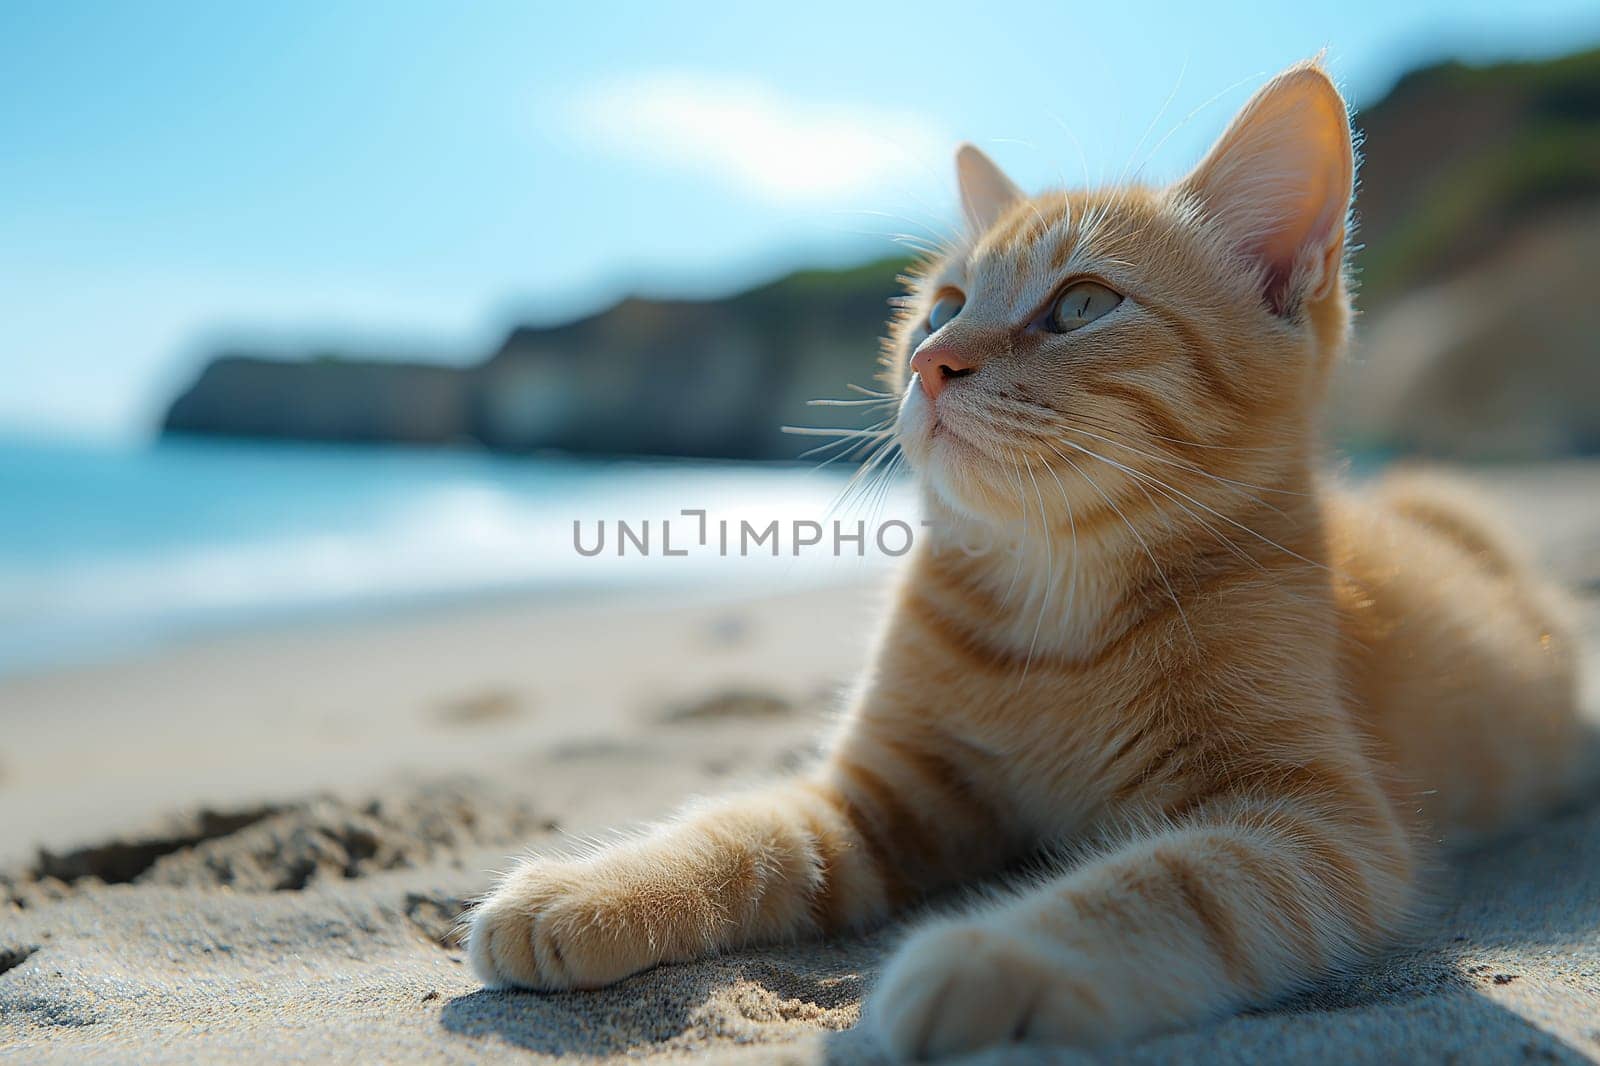 A cat at the beach relaxing sitting on sand on a sunny beautiful day